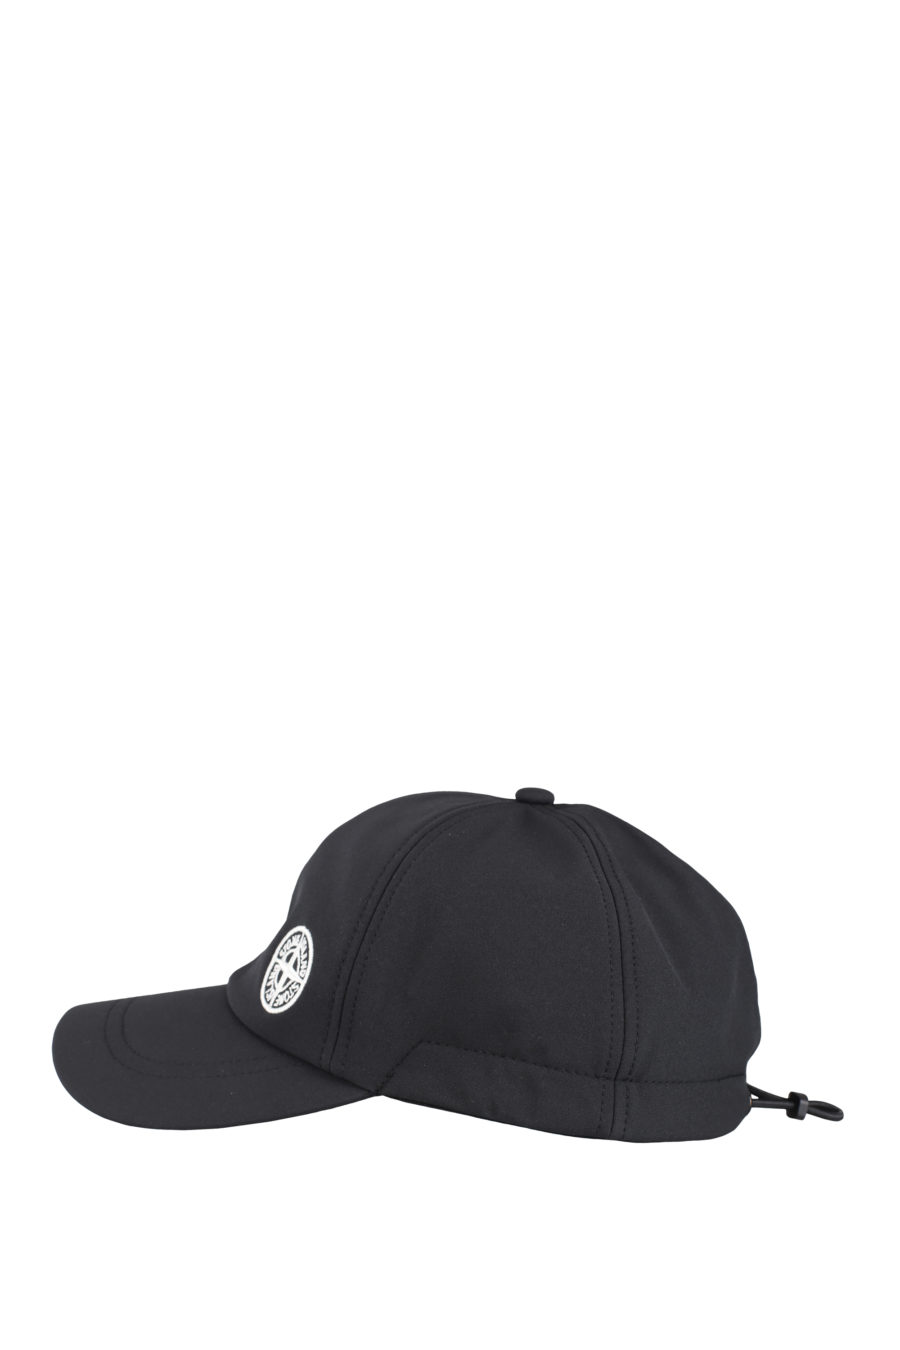 Black cap with white embroidered logo - IMG 9736